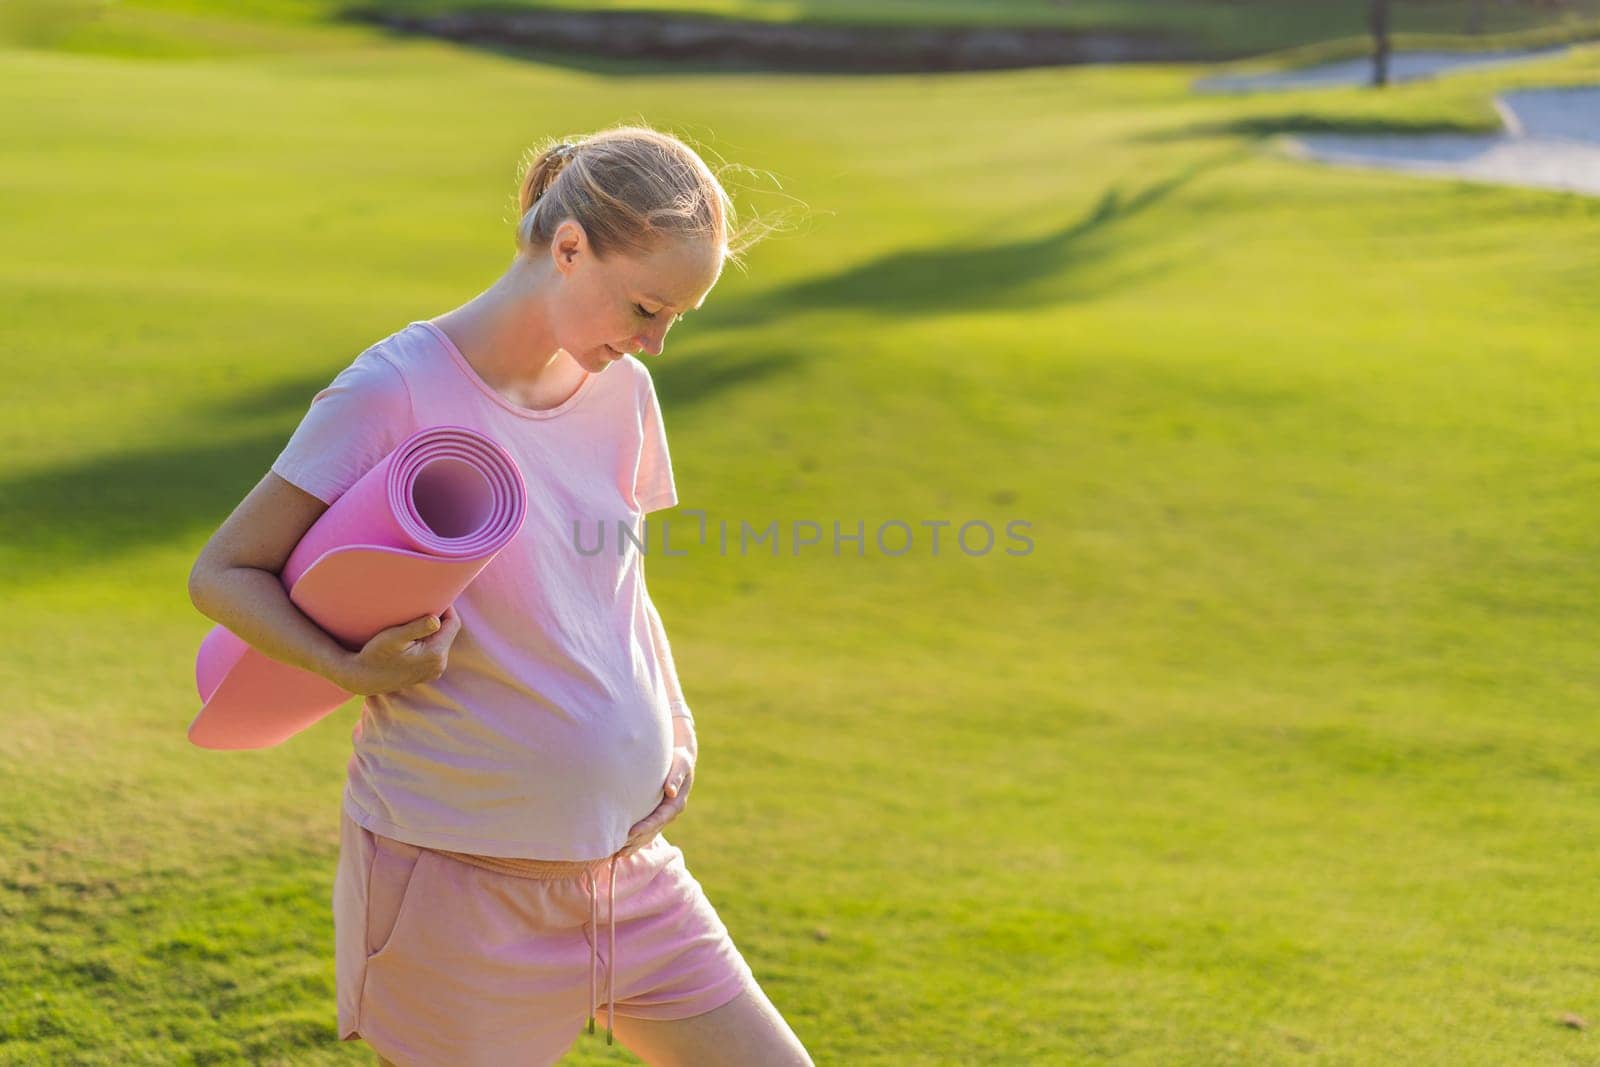 Energetic pregnant woman takes her workout outdoors, using an exercise mat for a refreshing and health-conscious outdoor exercise session by galitskaya